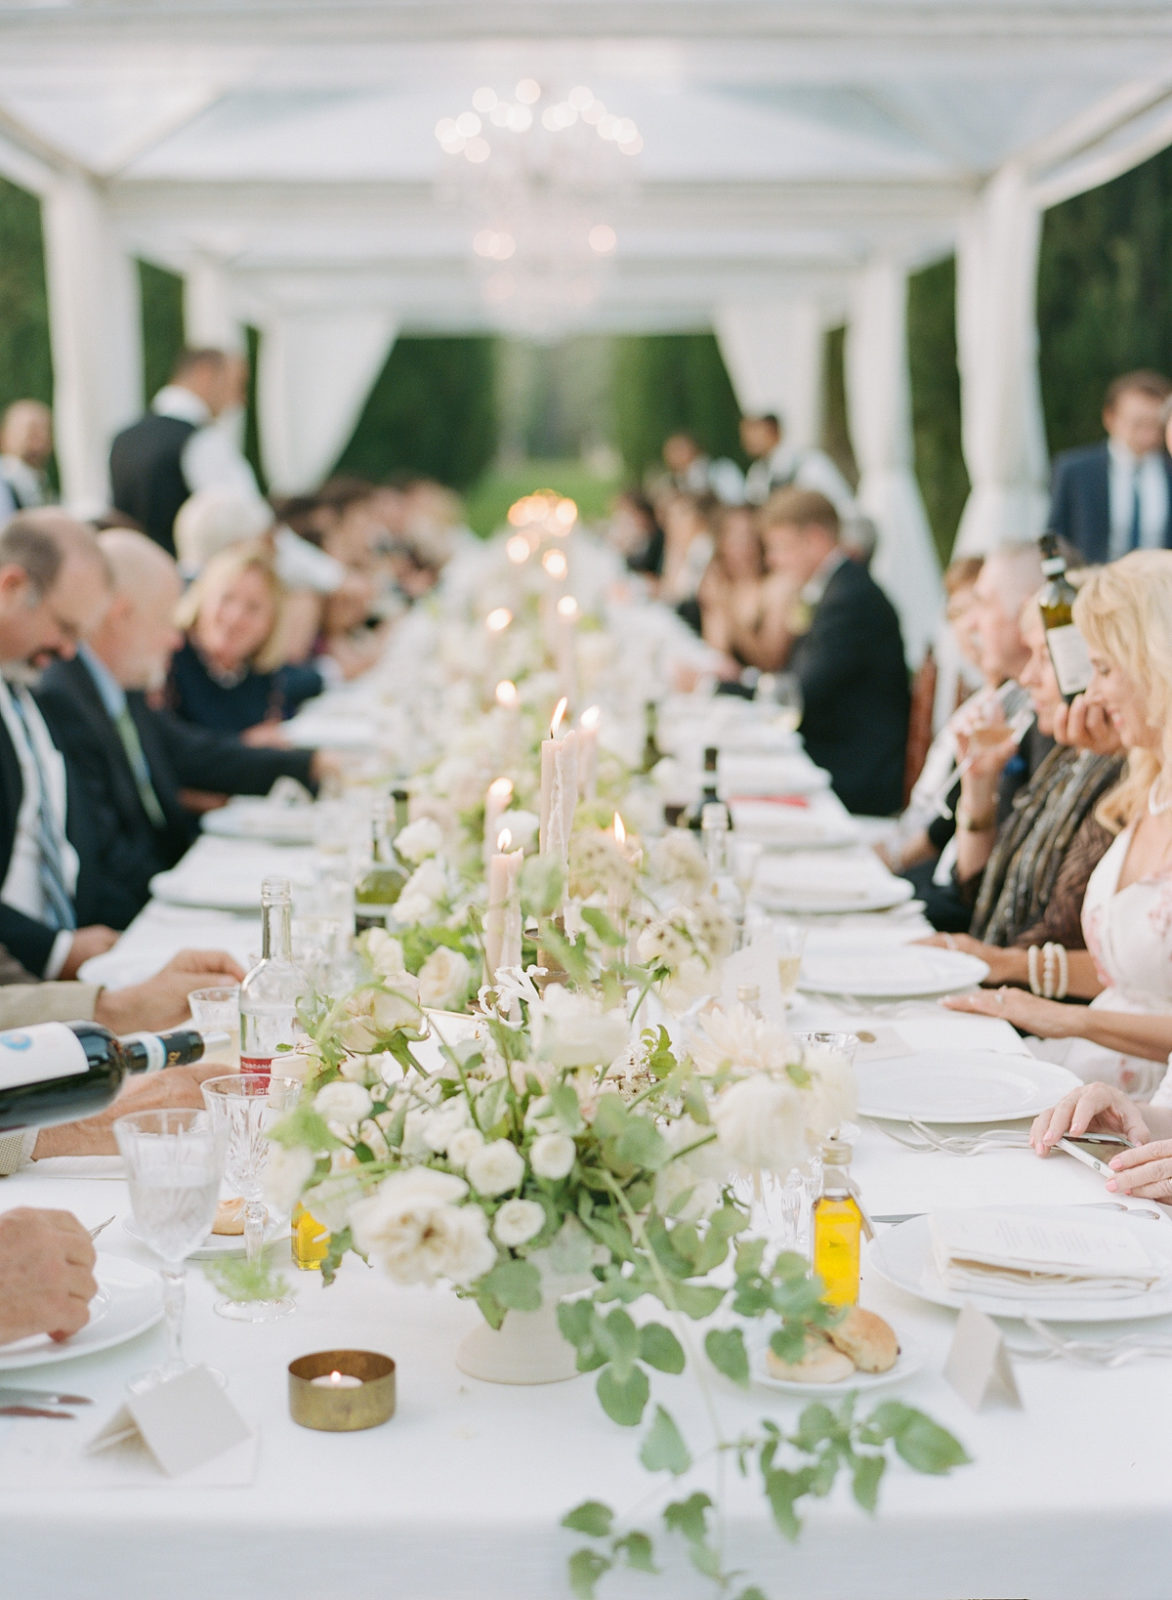 Villa Cetinale Wedding Photographer | Siena Wedding Venue | Tuscany Film Photographer | Italy Destination Wedding | Molly Carr Photography | White Wedding Reception Clear Tent Chandeliers